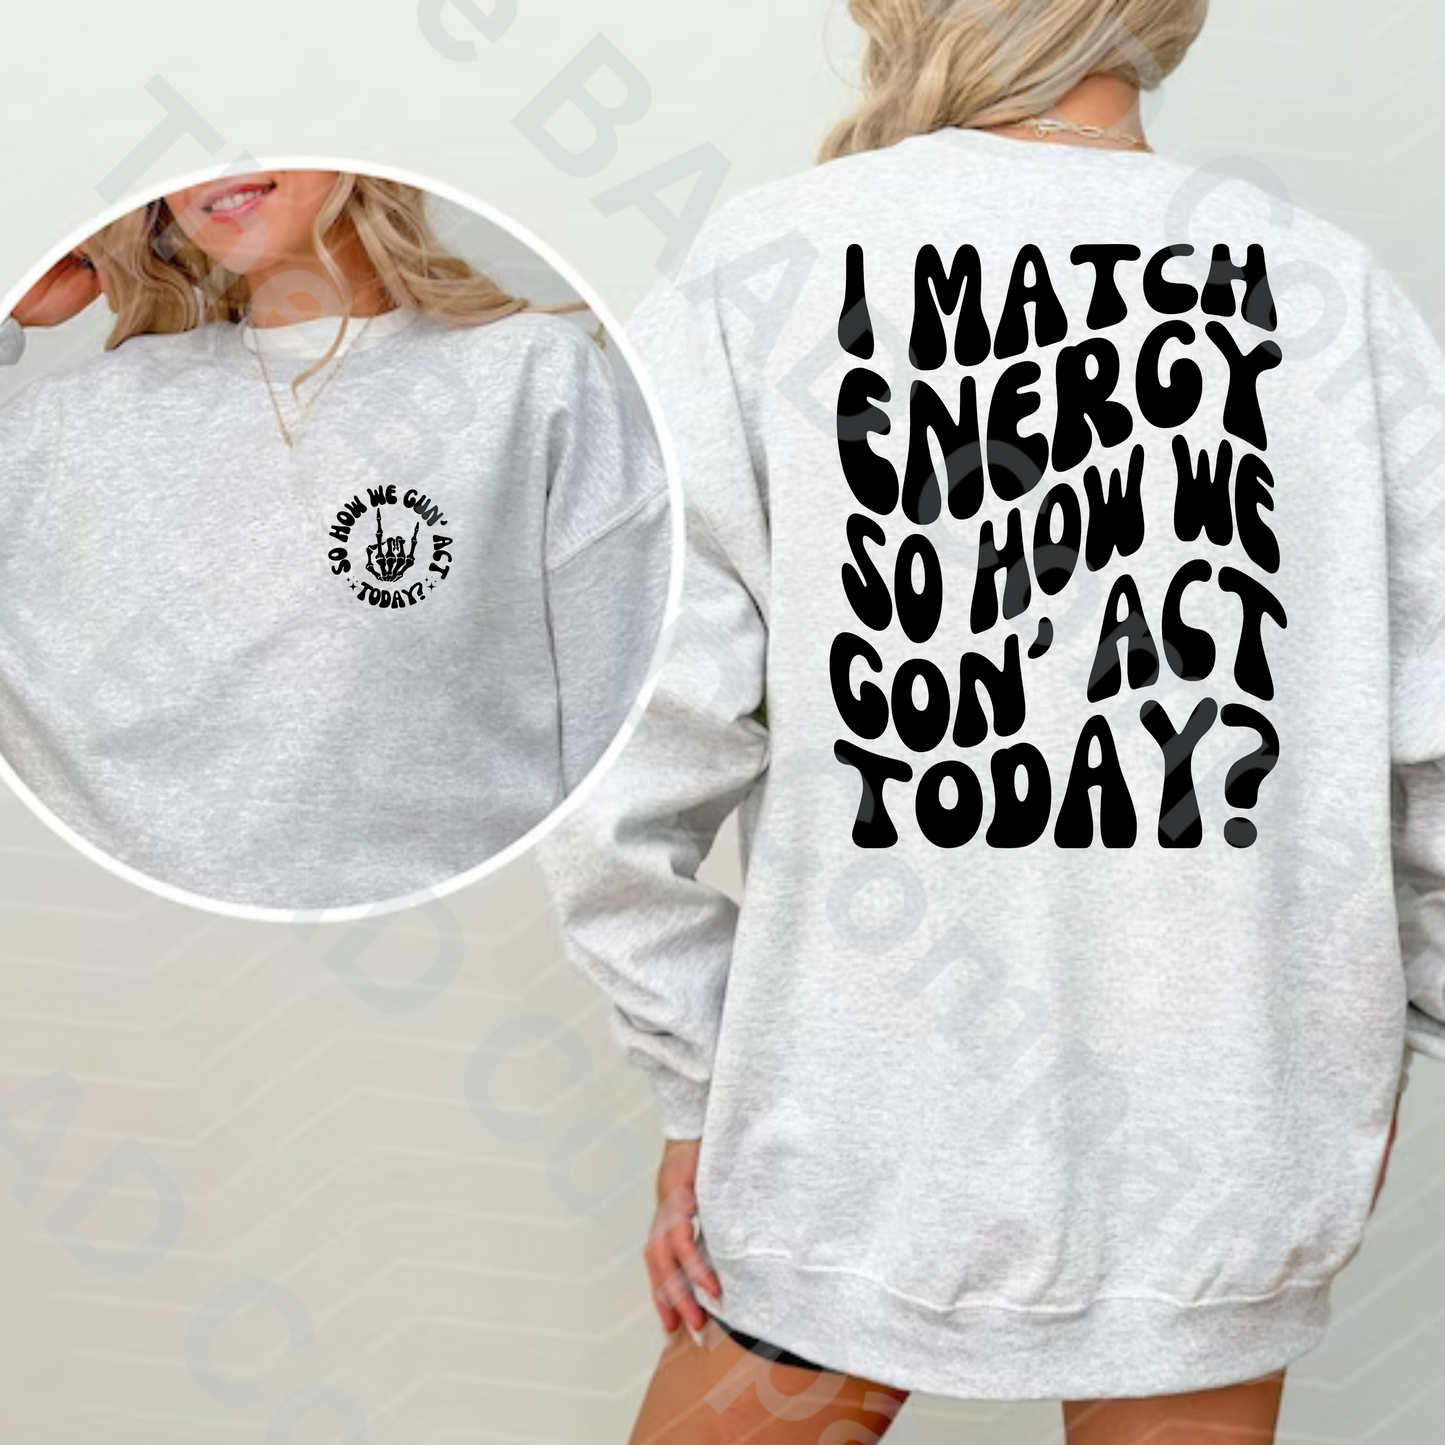 How We Gon' Act Today Graphic Crewneck